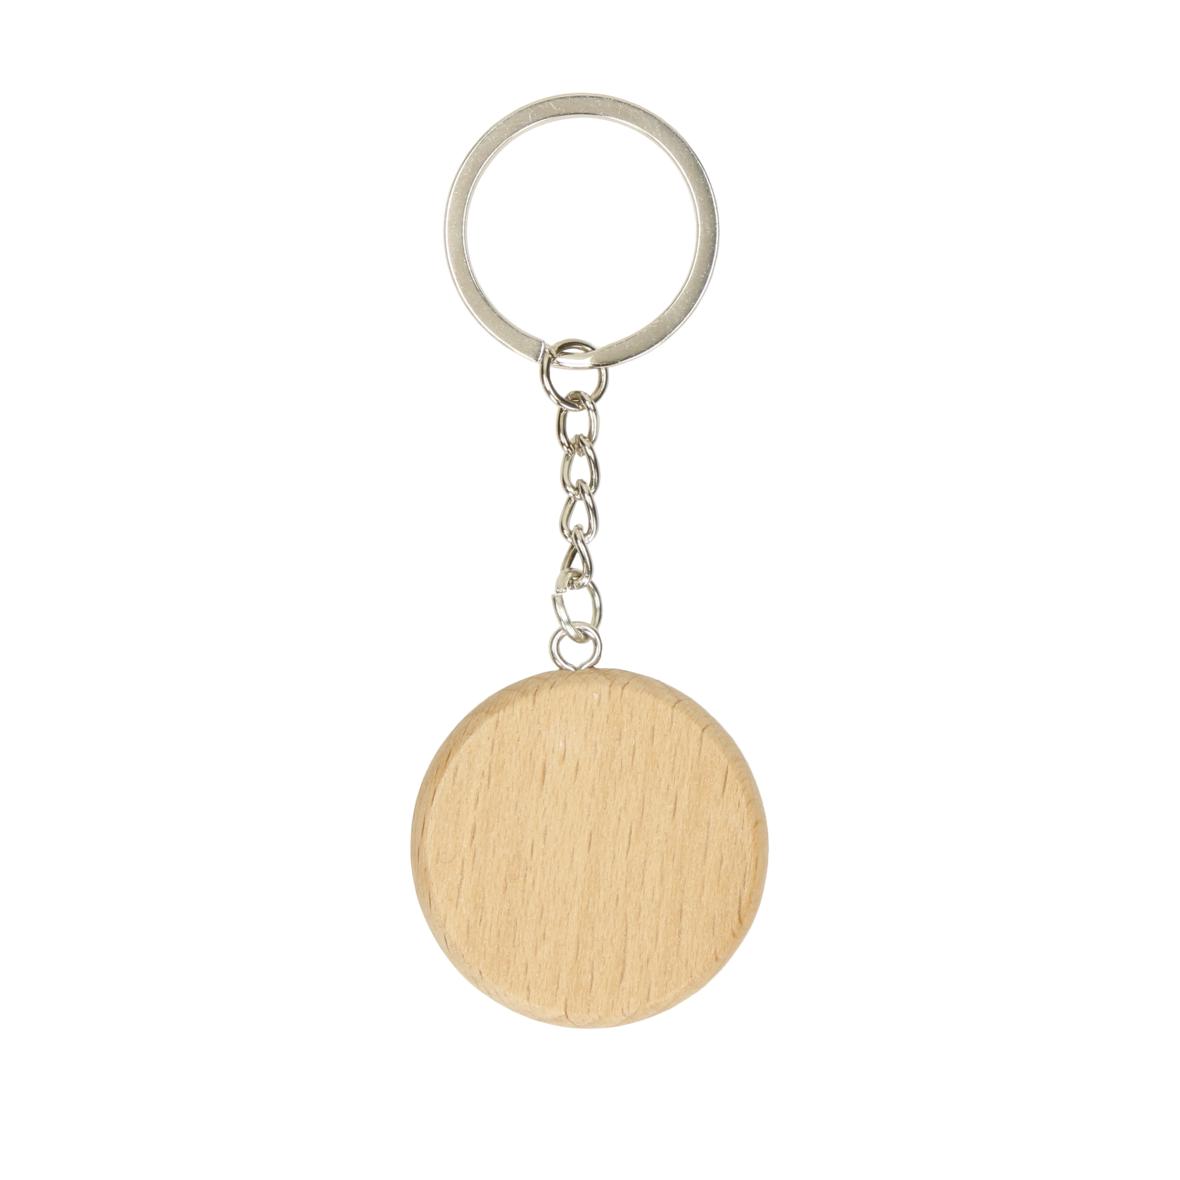 A round-shaped key ring that includes a metal chain and ring - Bicker - Weymouth